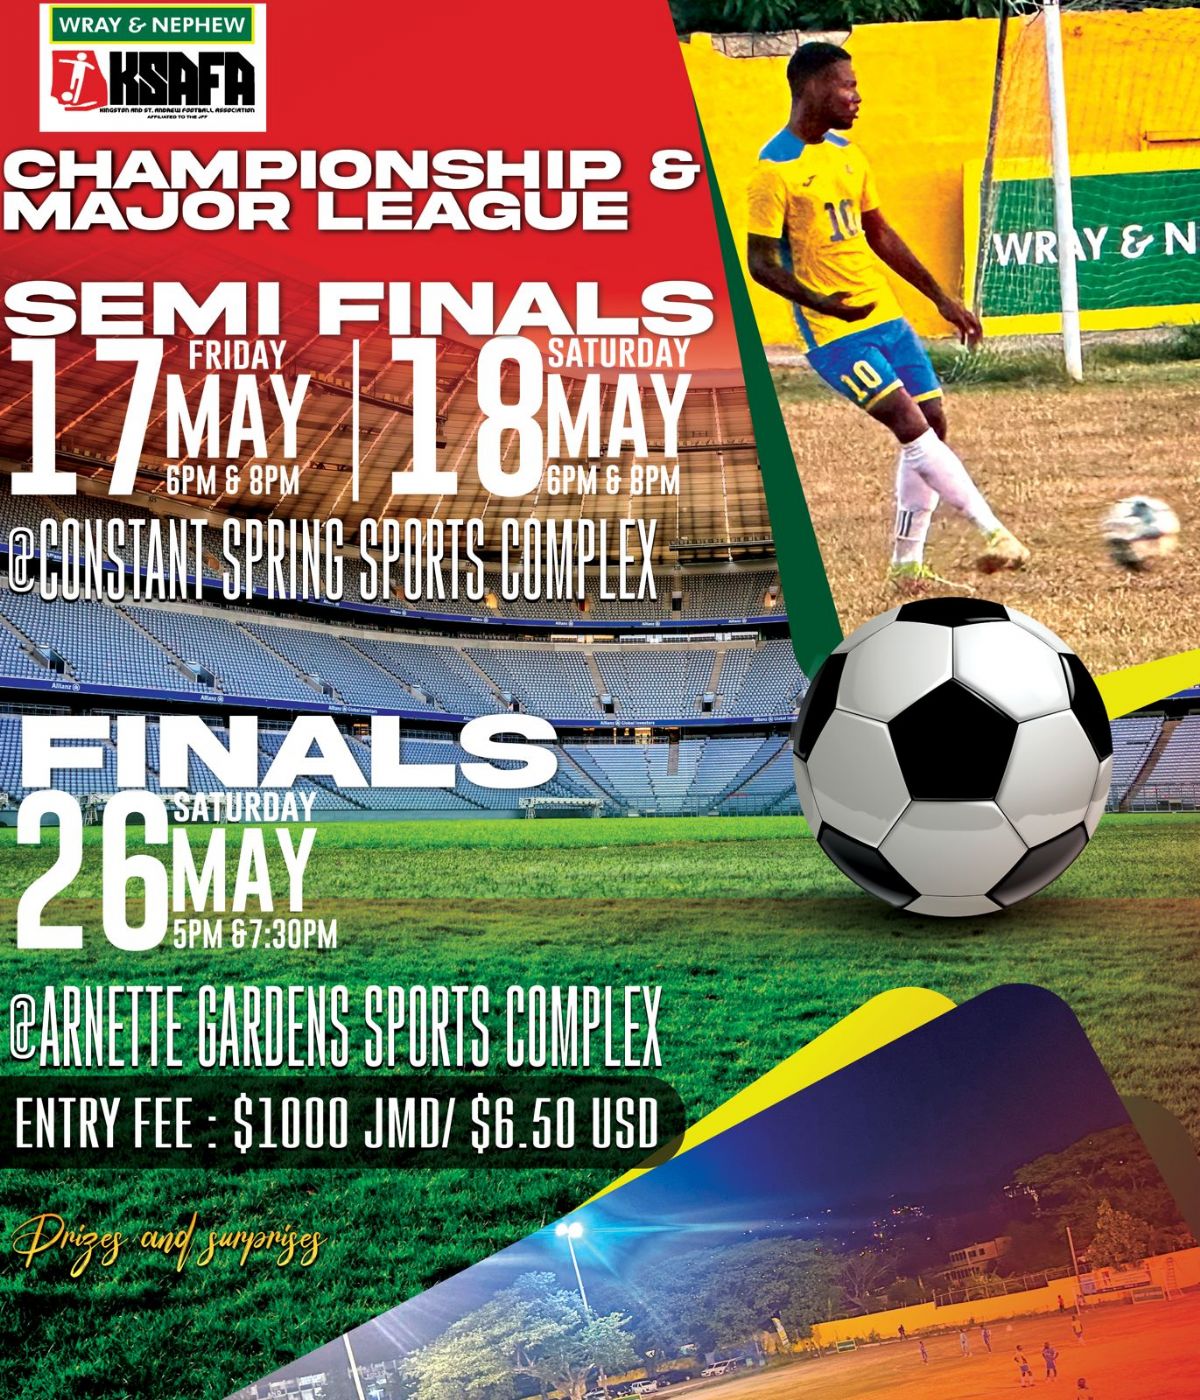 KSAFA/ Wray and Nephew Major League  and Championship Finals Event Poster